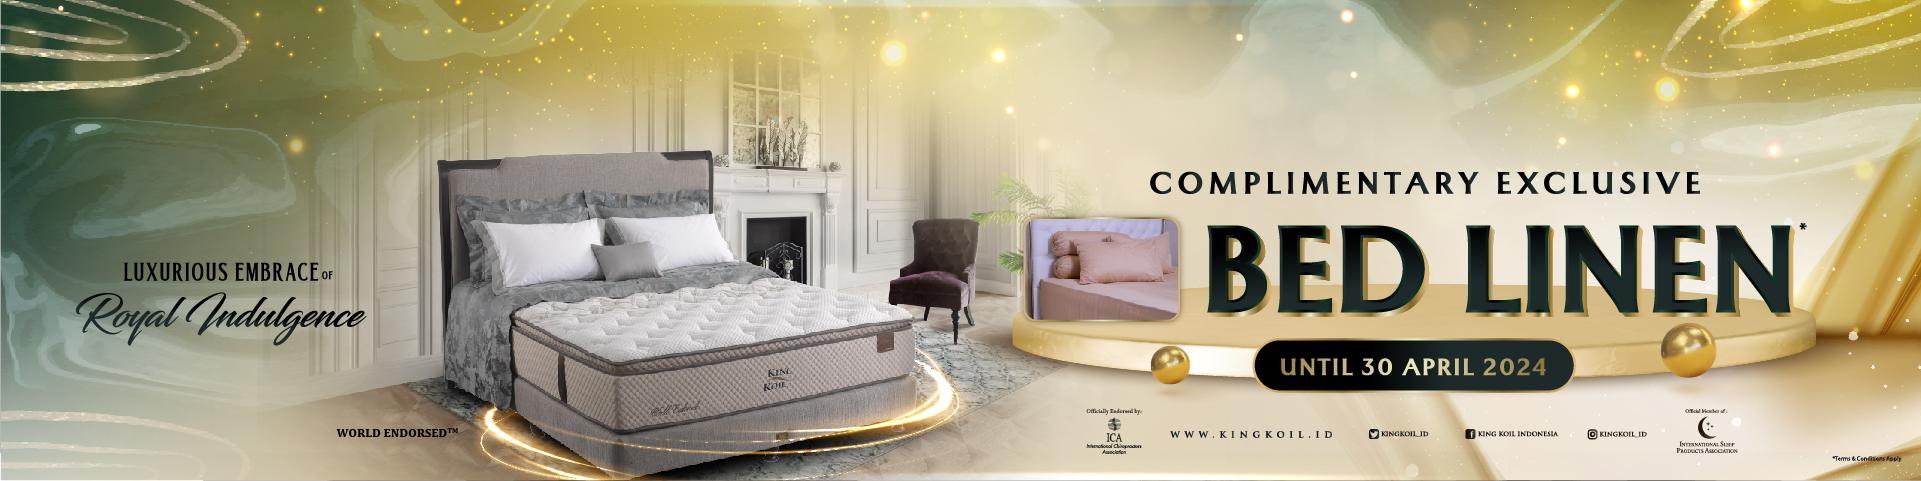 Promotion April 2024: Complimentary Exclusive Bed Linen